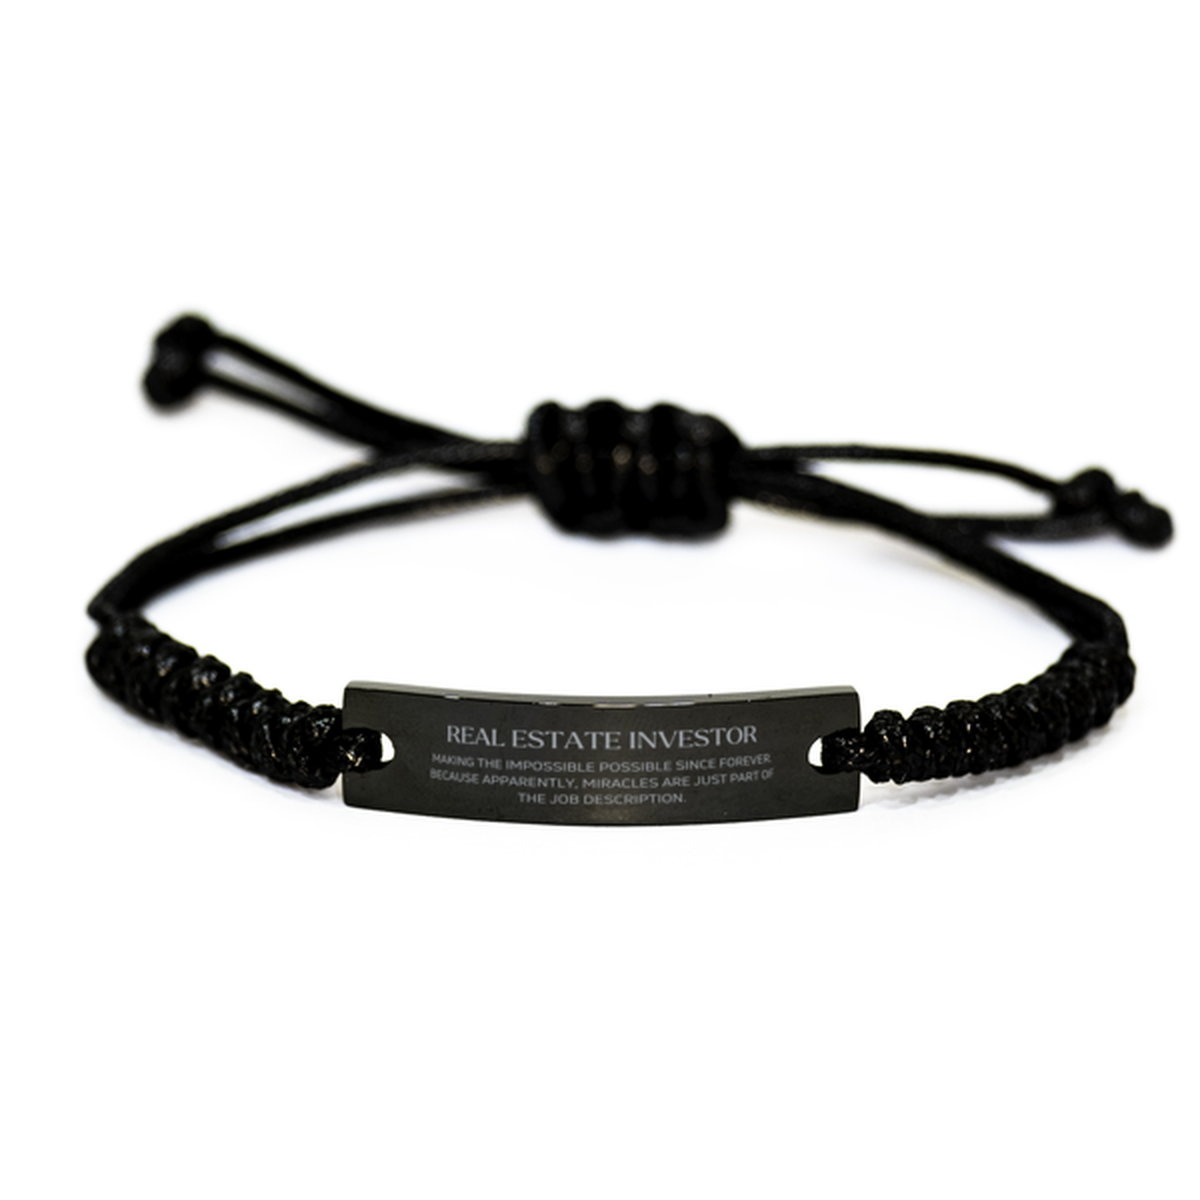 Funny Real Estate Investor Gifts, Miracles are just part of the job description, Inspirational Birthday Black Rope Bracelet For Real Estate Investor, Men, Women, Coworkers, Friends, Boss